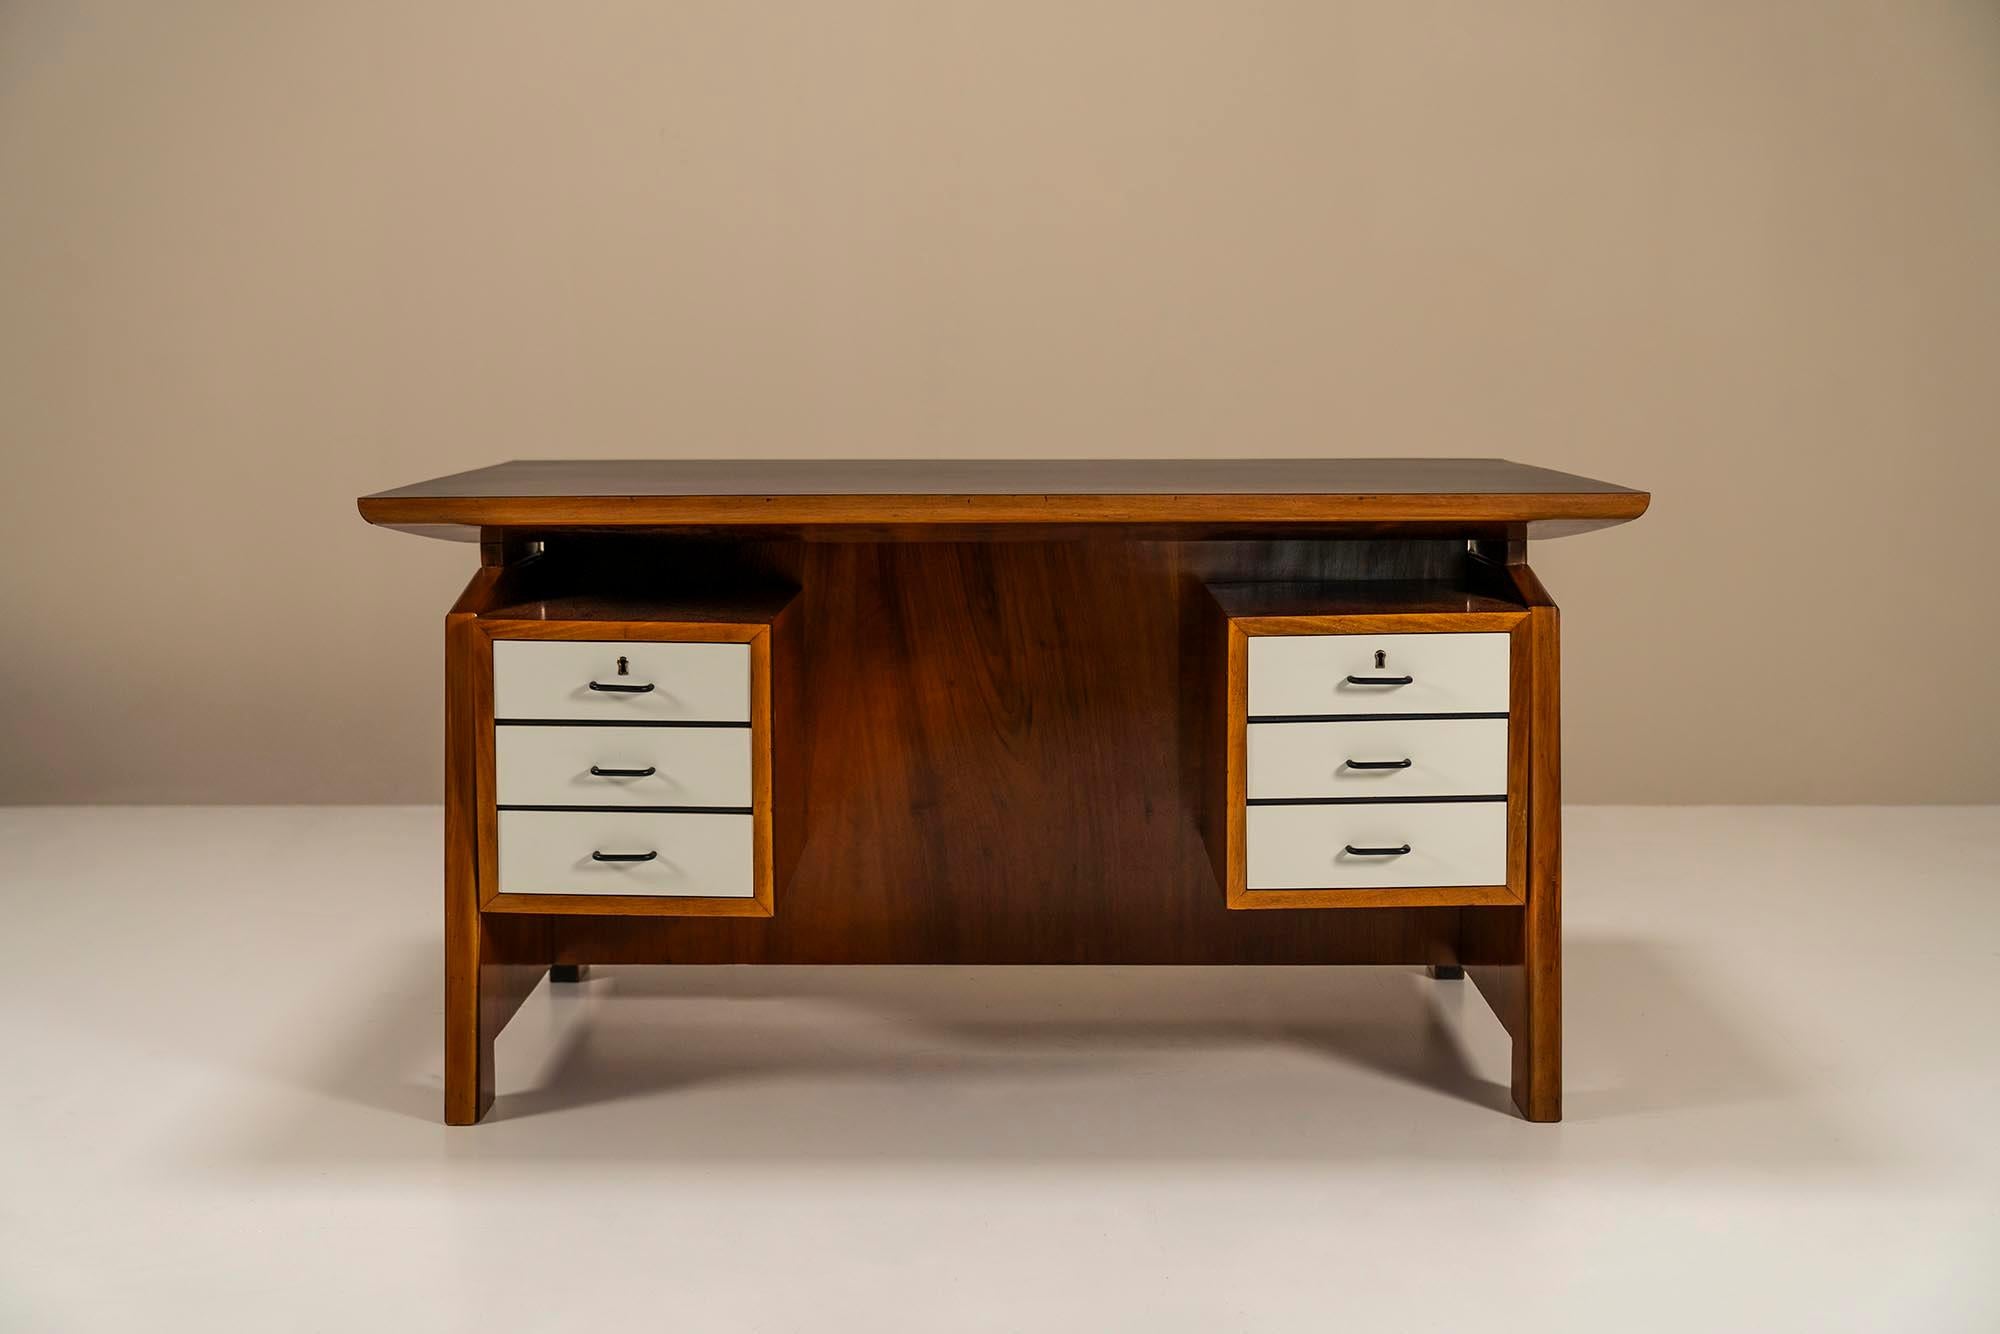 Architectural Desk in walnut by Carlo De Carli.This desk has a very solid and a kind of determined look with the unmistakable charm of the Italian design of the fifties. According to tradition, this is a design by the Italian master Carlo De Carli.